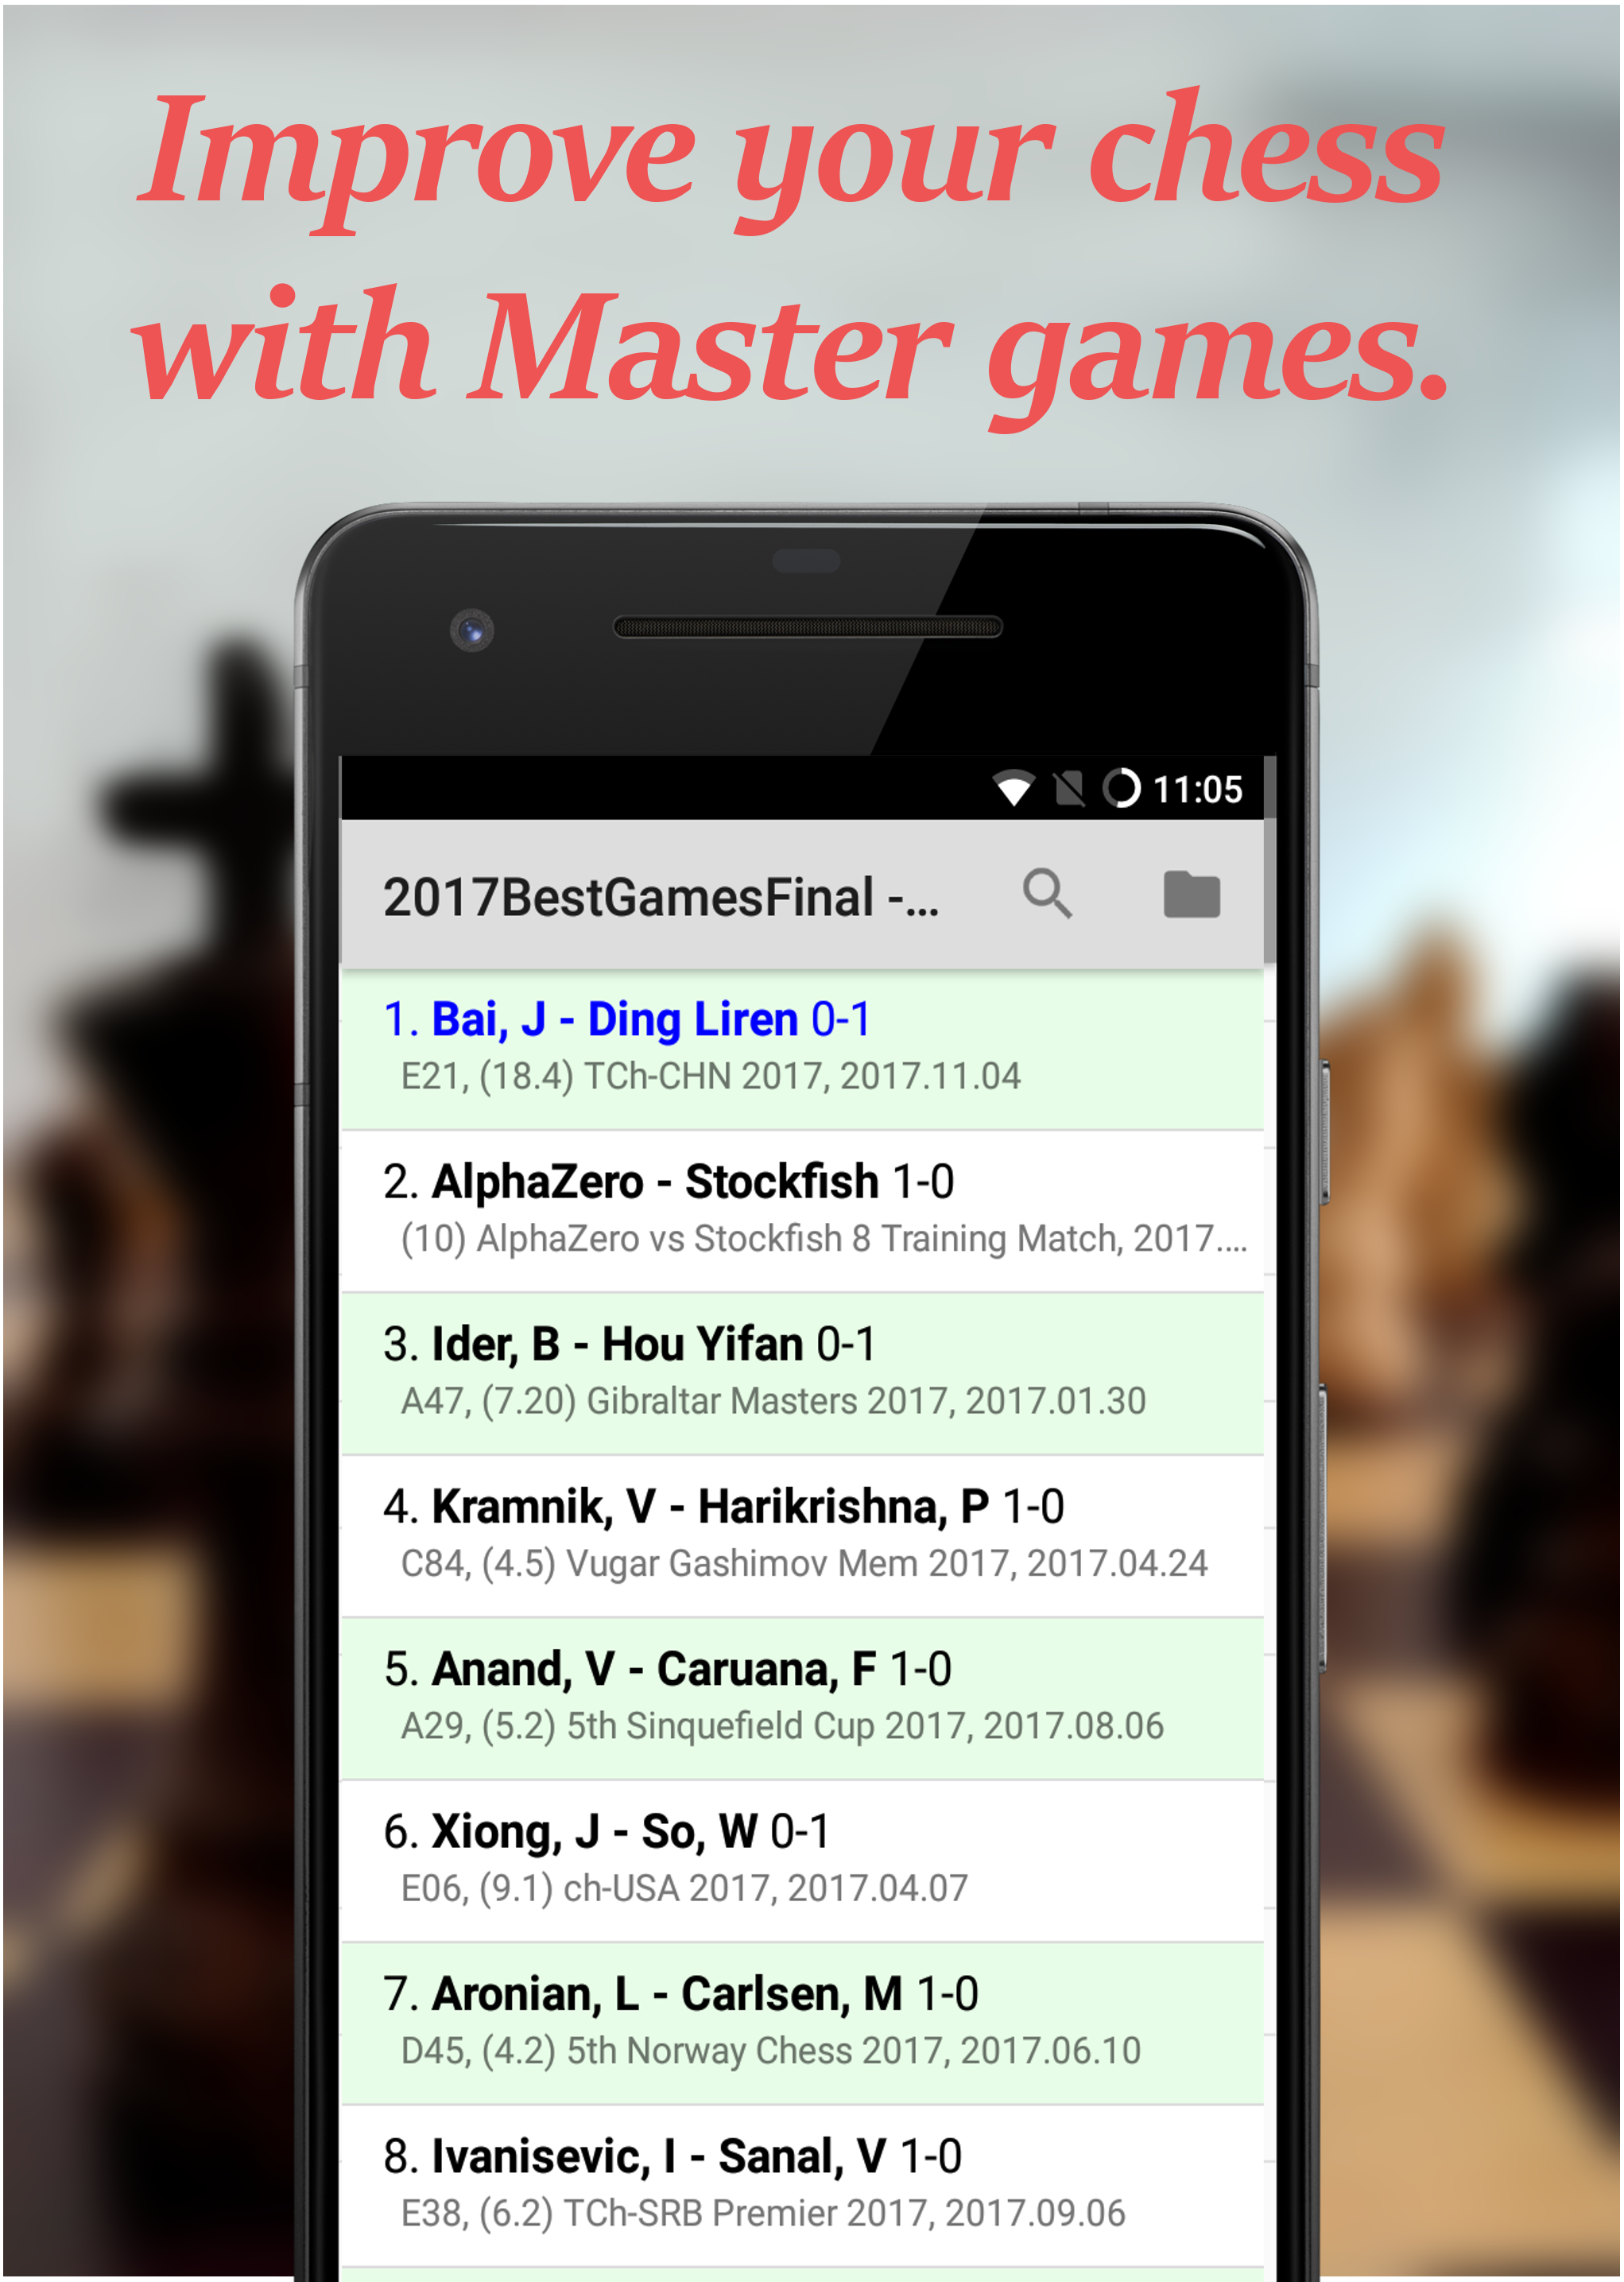 Android application Chess - Analyze This screenshort